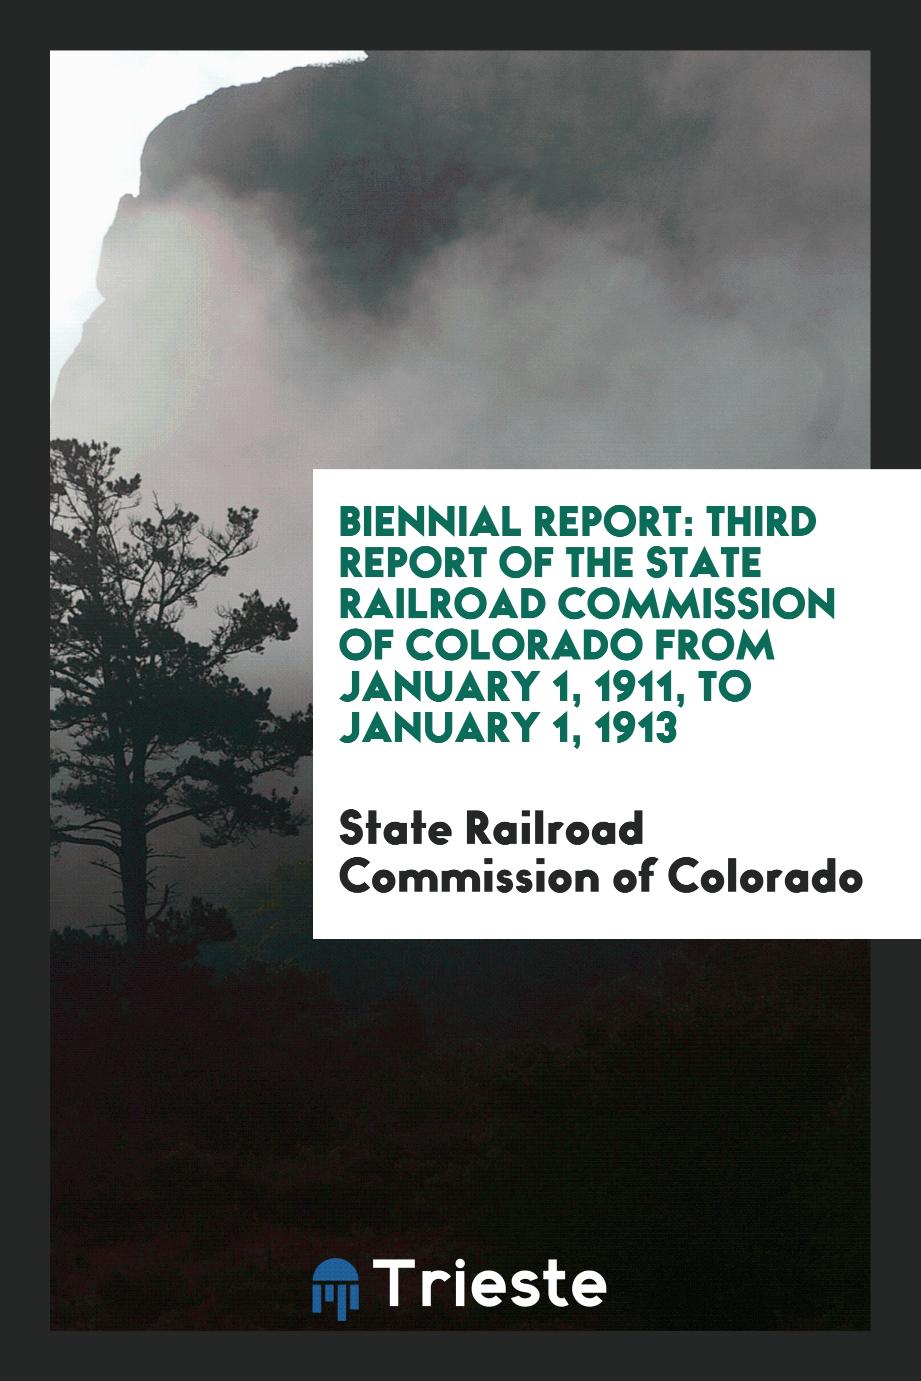 Biennial Report: Third Report of the State Railroad Commission of Colorado from January 1, 1911, to January 1, 1913